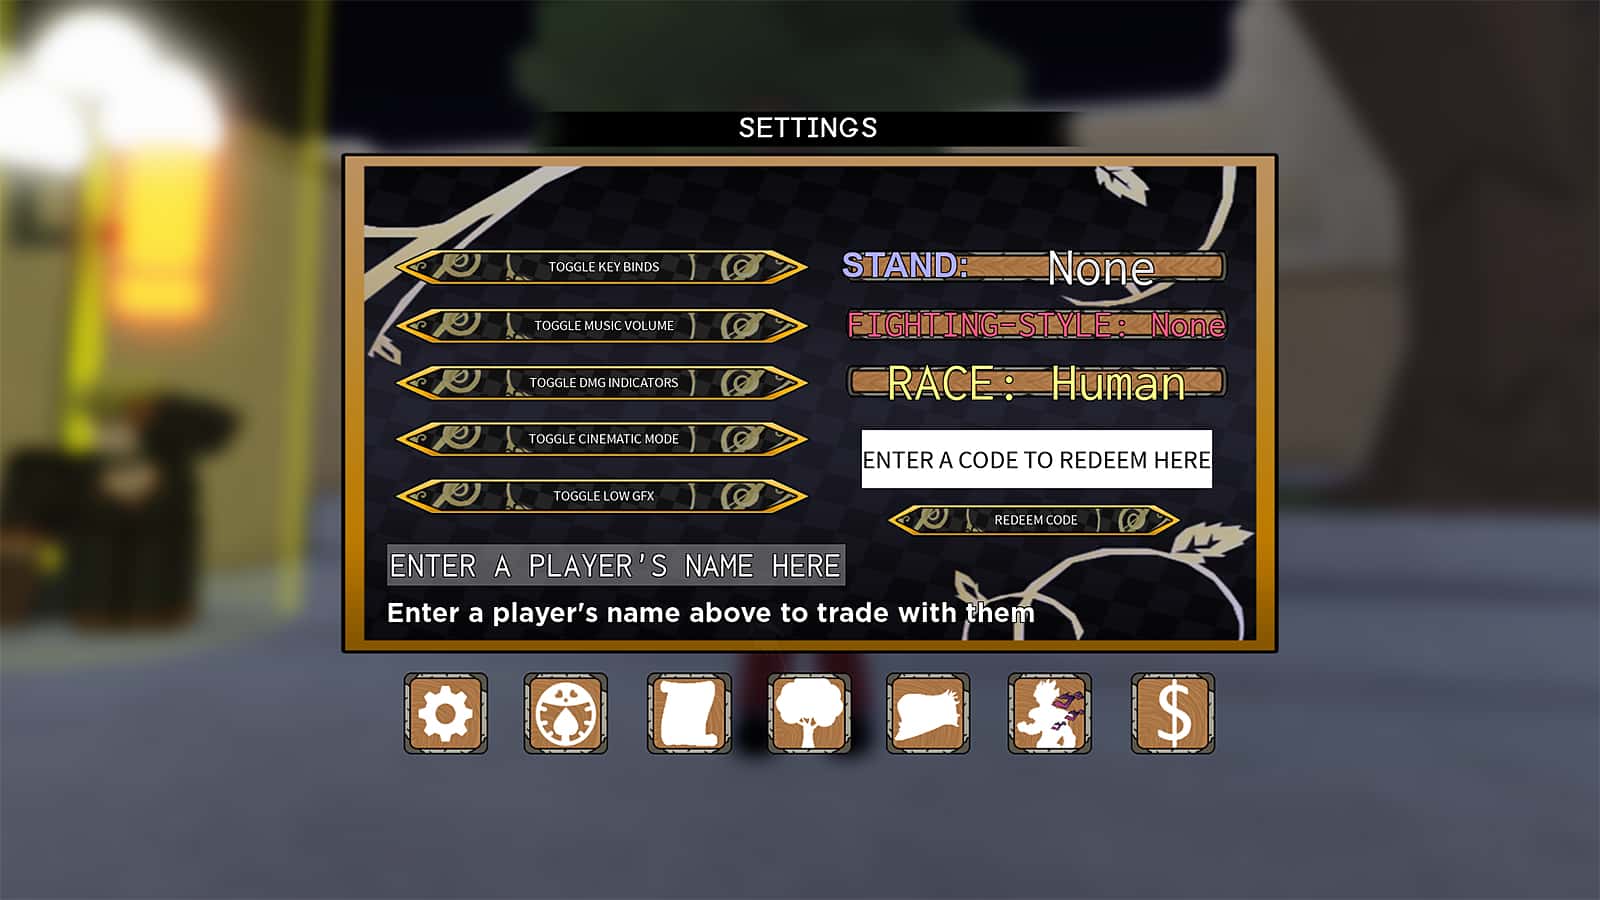 An image of the settings menu in YBA, where you can enter codes